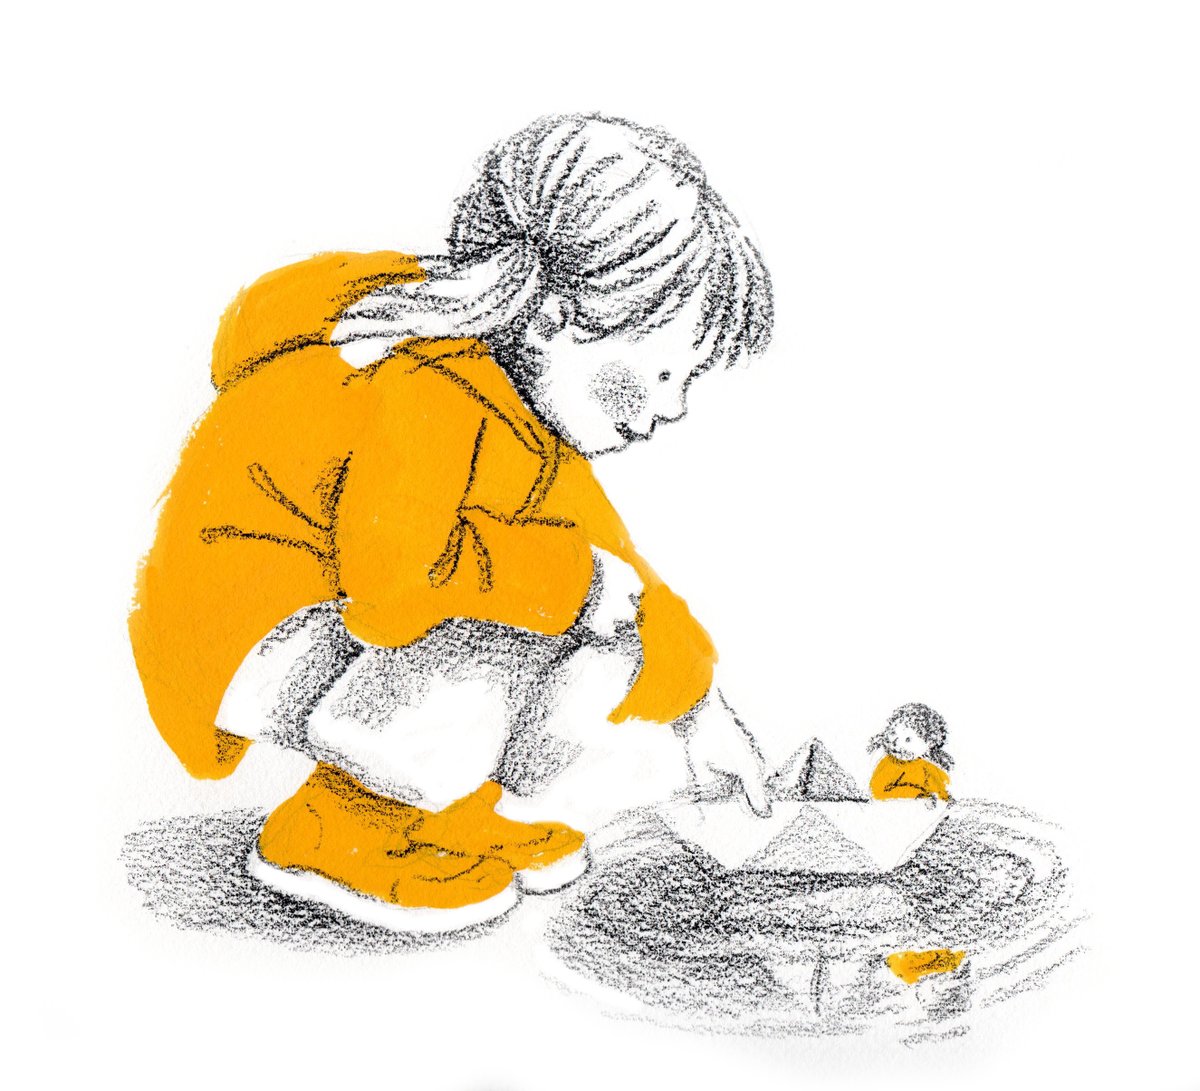 Here's my entry for #scbwidrawthis: #yellow.